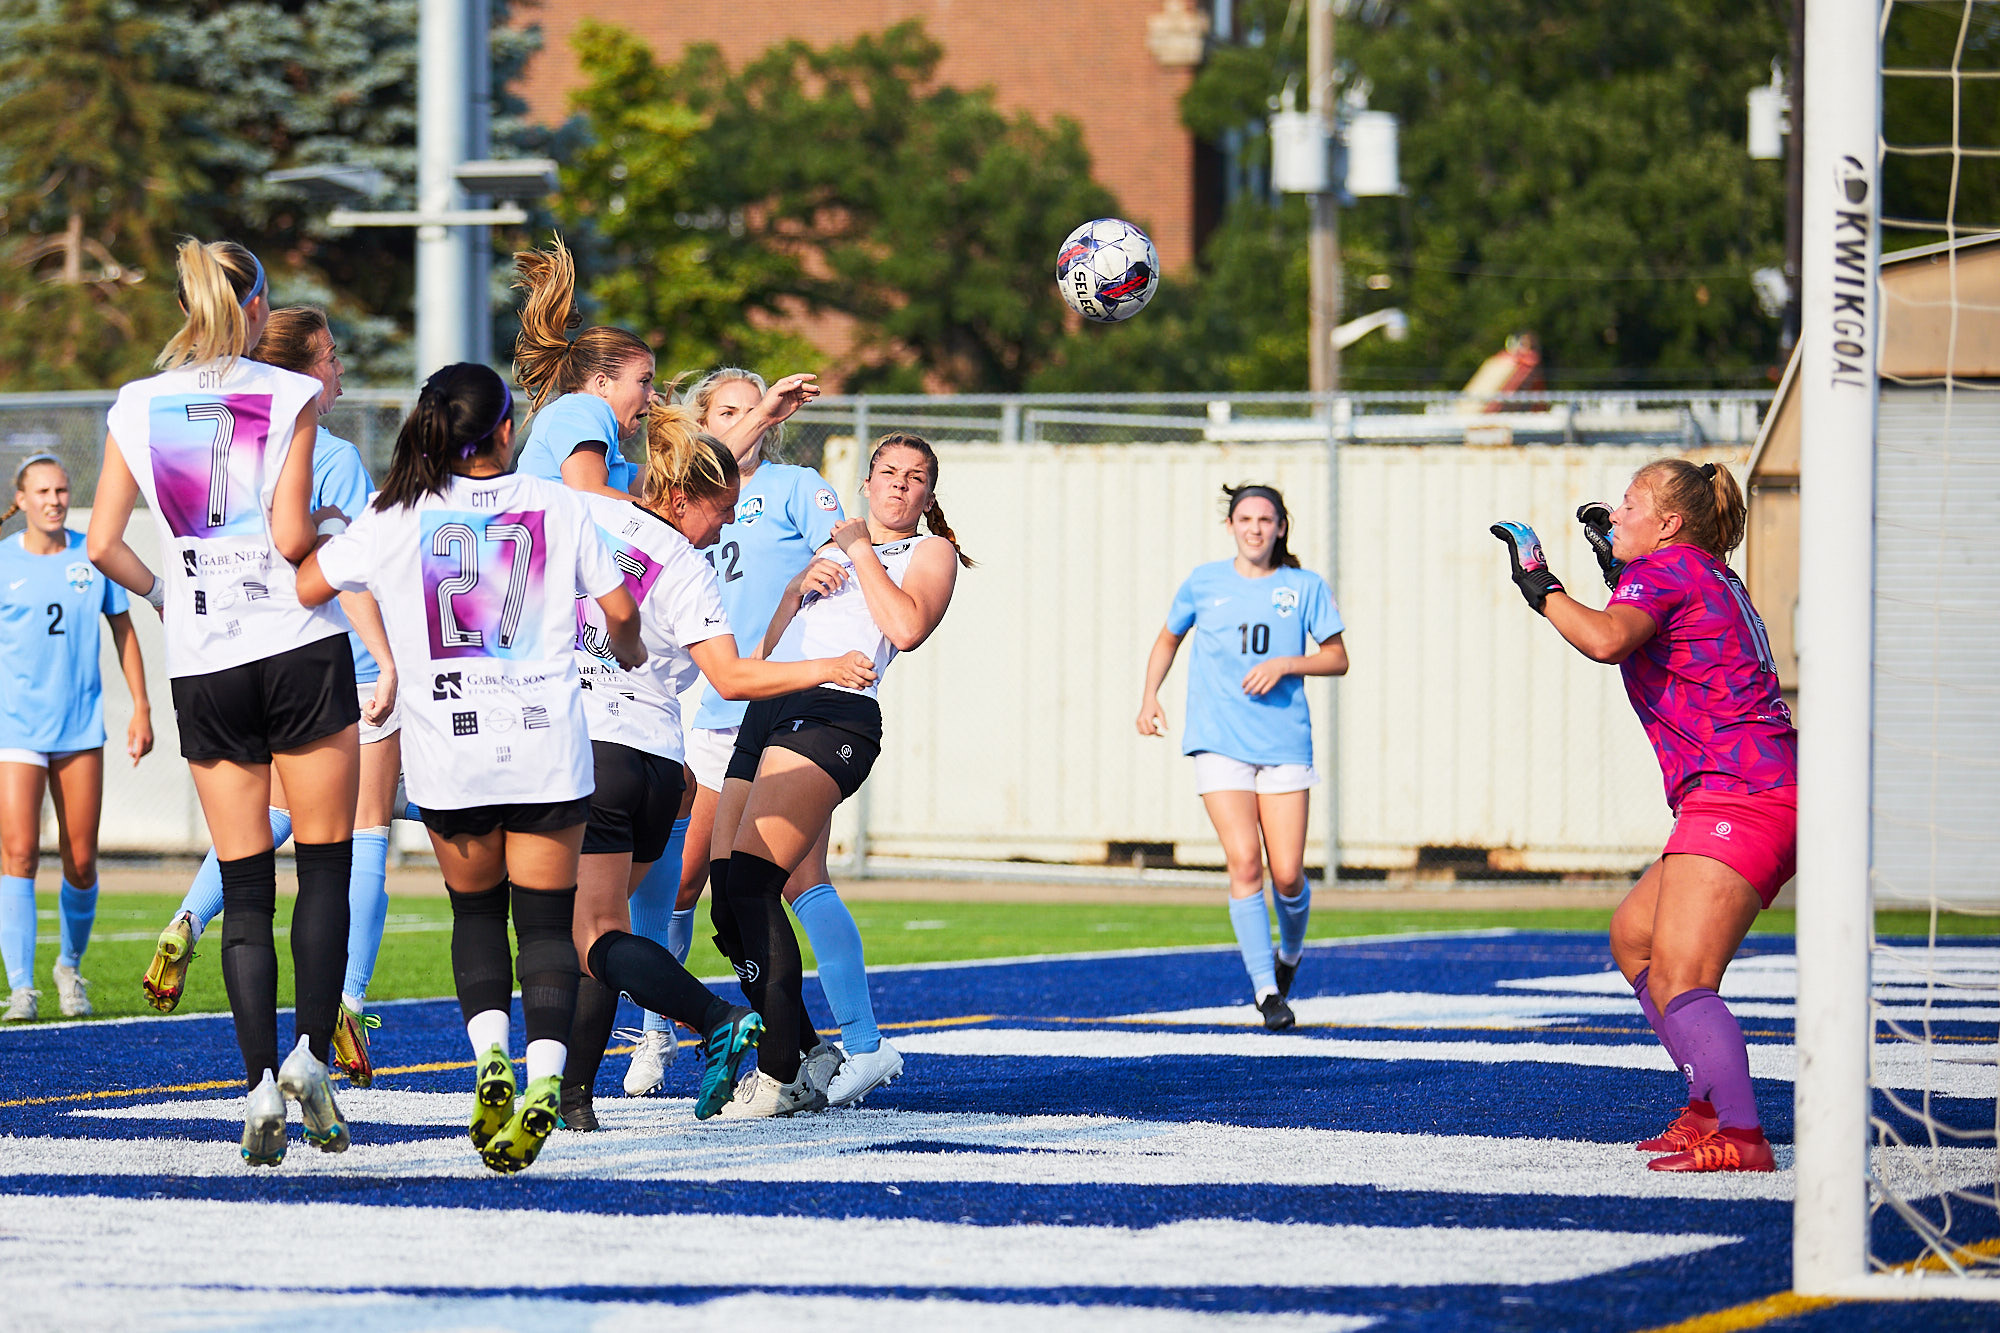 A group of women in soccer kits fight for a ball, which is in the middle of the frame. A goalkeeper is pictured in the right side, diving